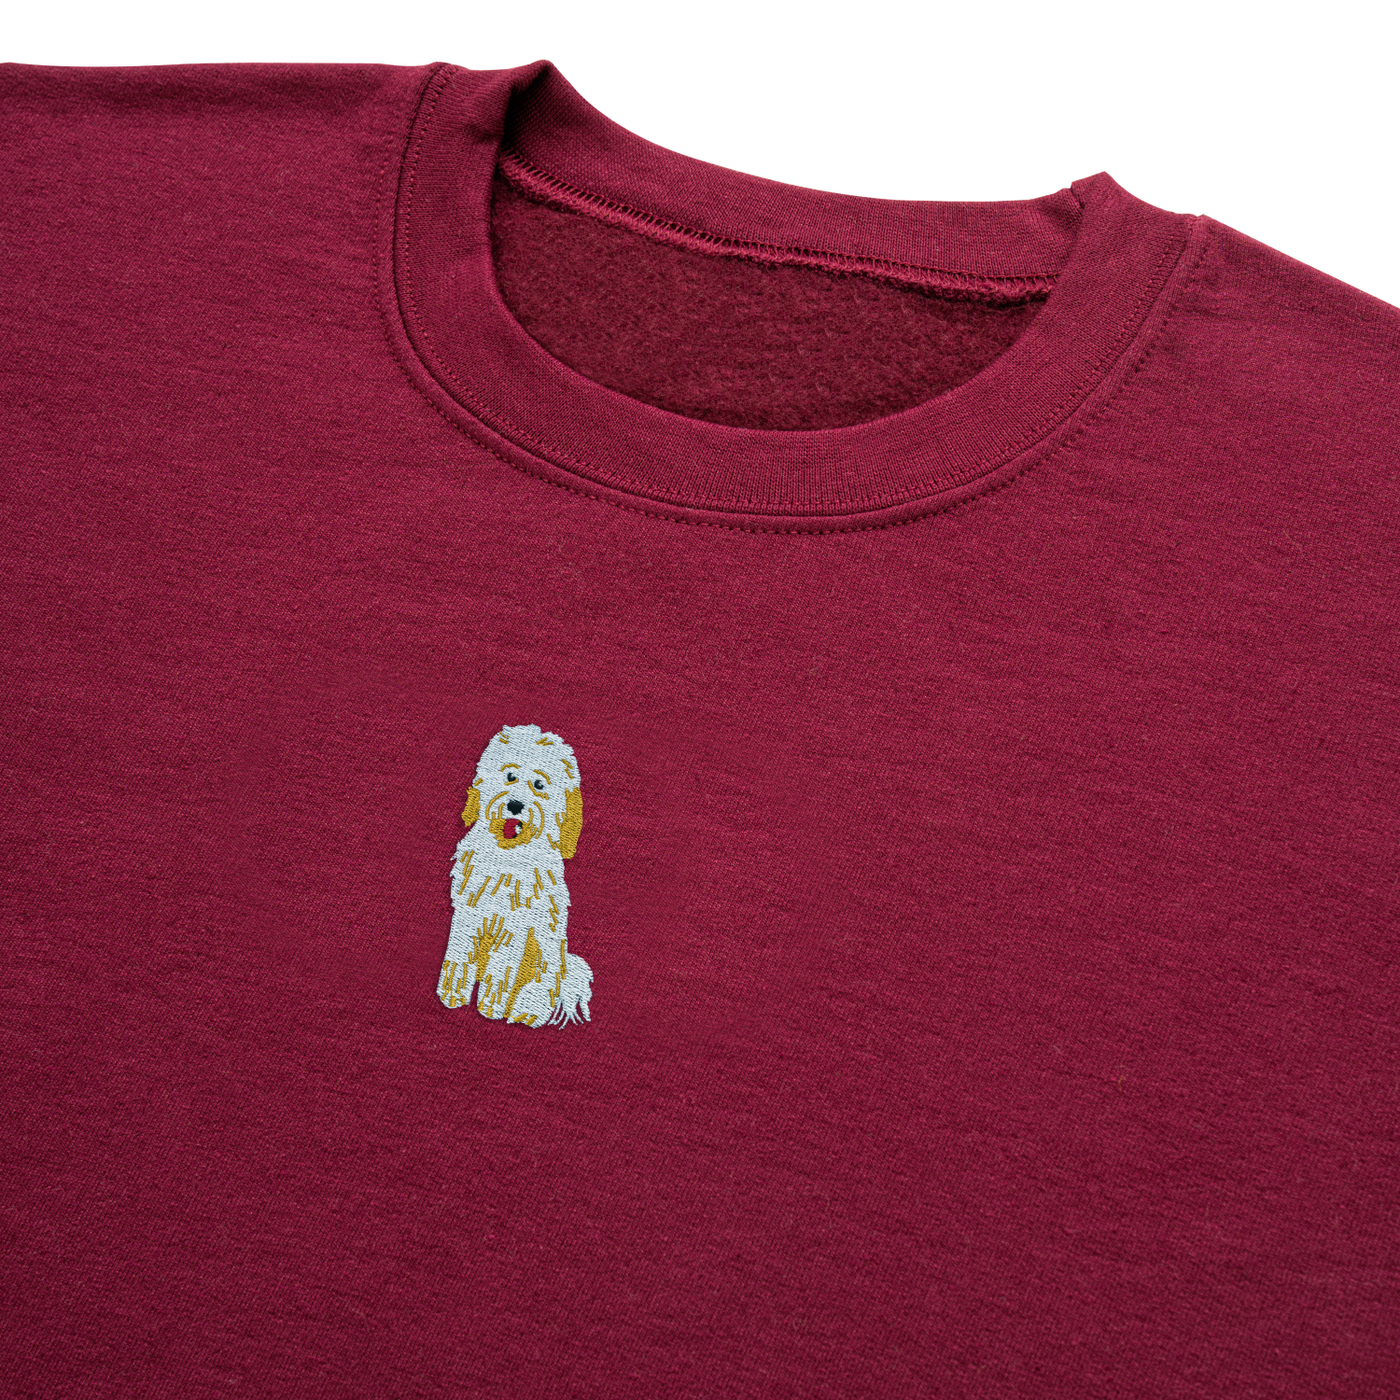 Bobby's Planet Men's Embroidered Poodle Sweatshirt from Bobbys Planet Toy Poodle Collection in Maroon Color#color_maroon